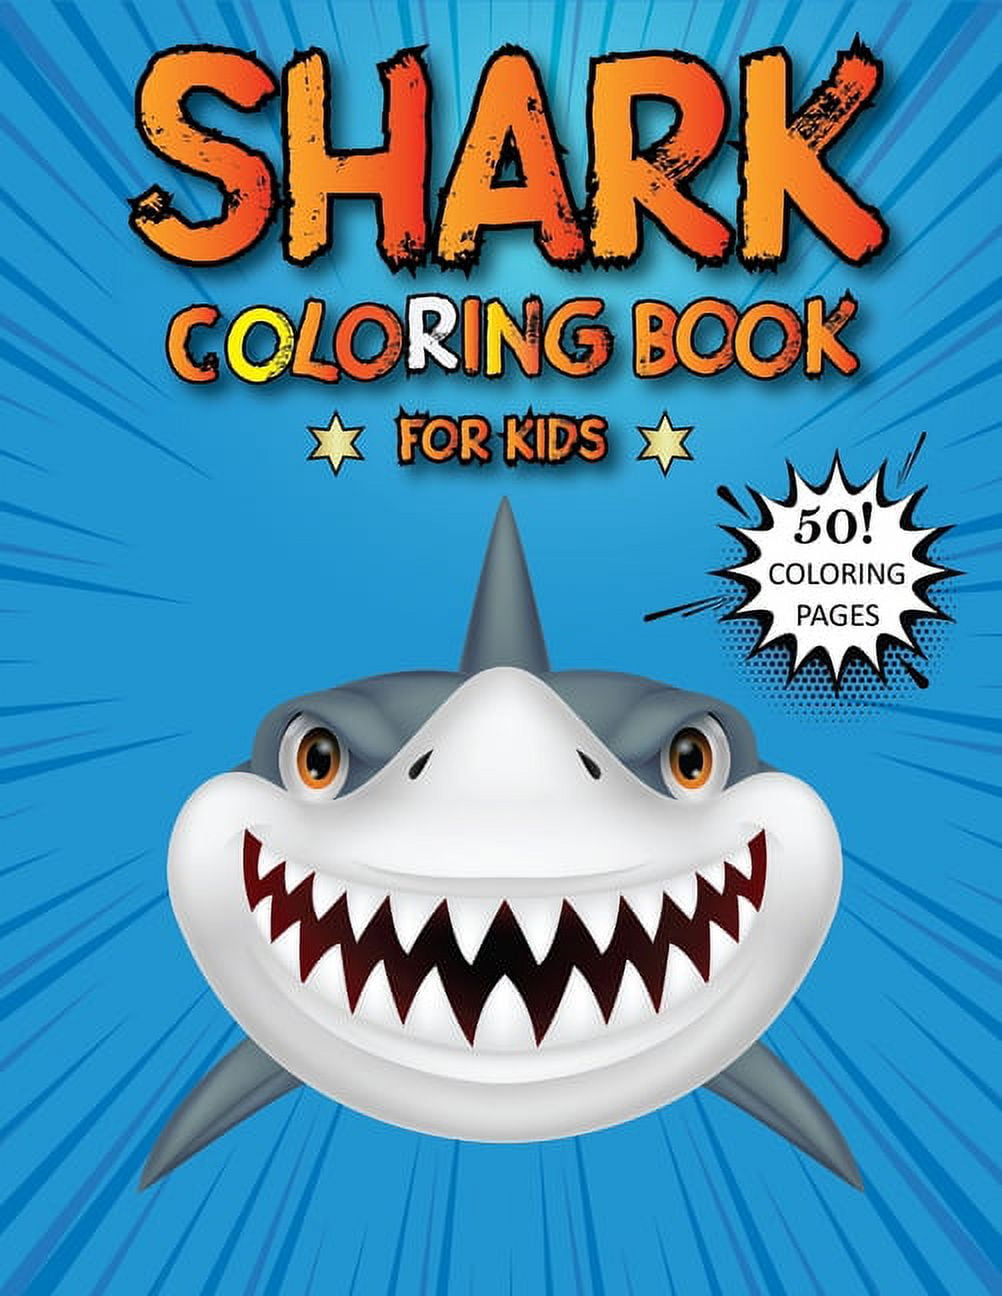 Shark Birthday Coloring Book: 9 year old girl birthday gift ideas shark  coloring book, 9 year old boy gifts ocean party favors, 9 year old girl  gifts  gift ideas, 9th shark